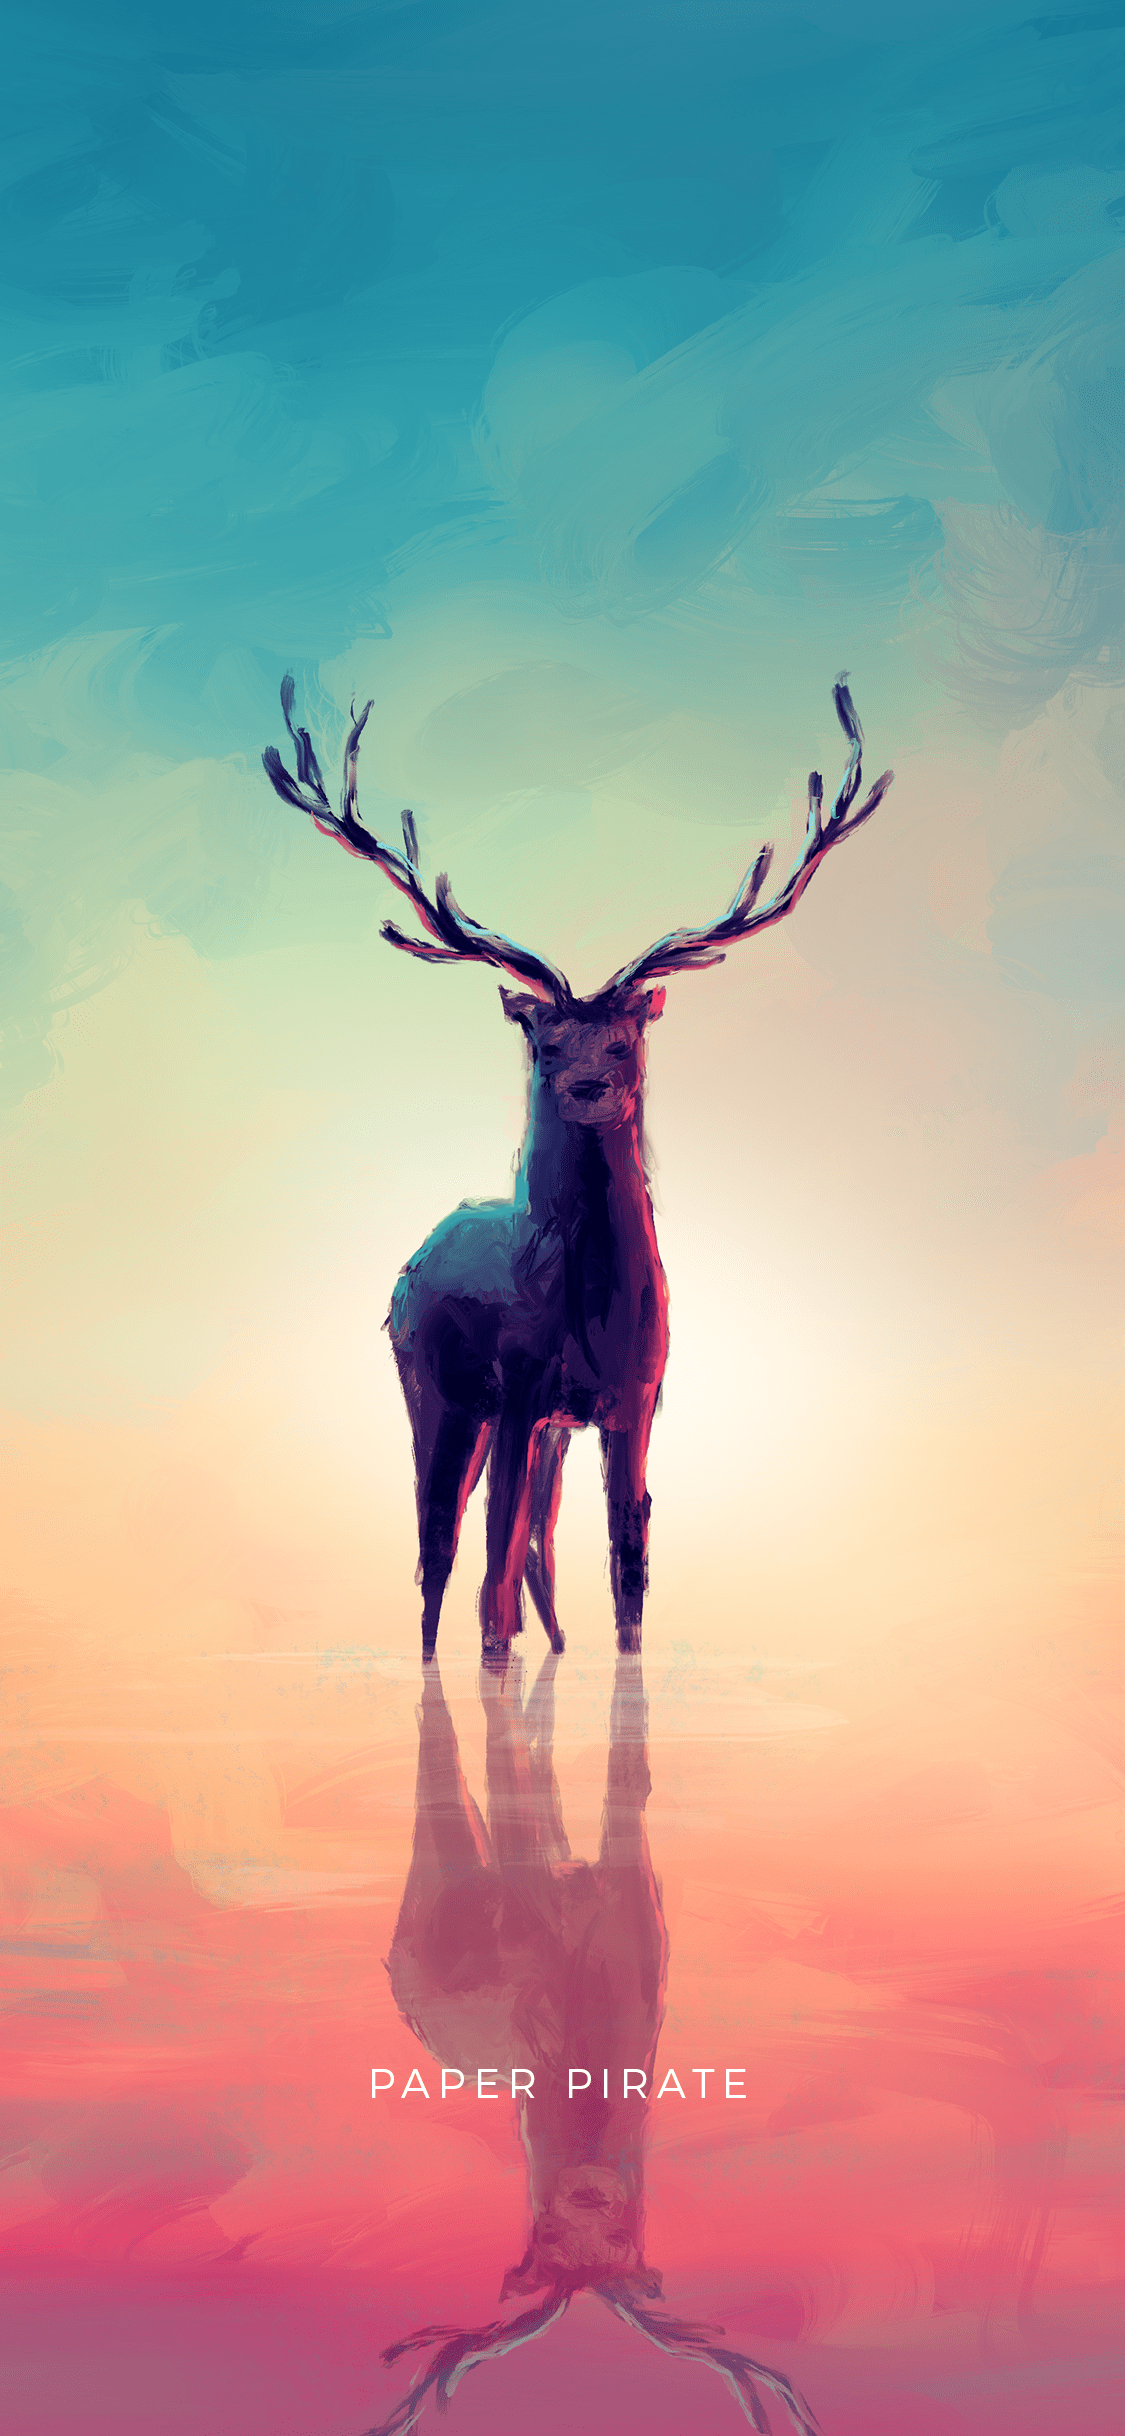 A digital painting of a deer standing in a pink and blue landscape - Pirate